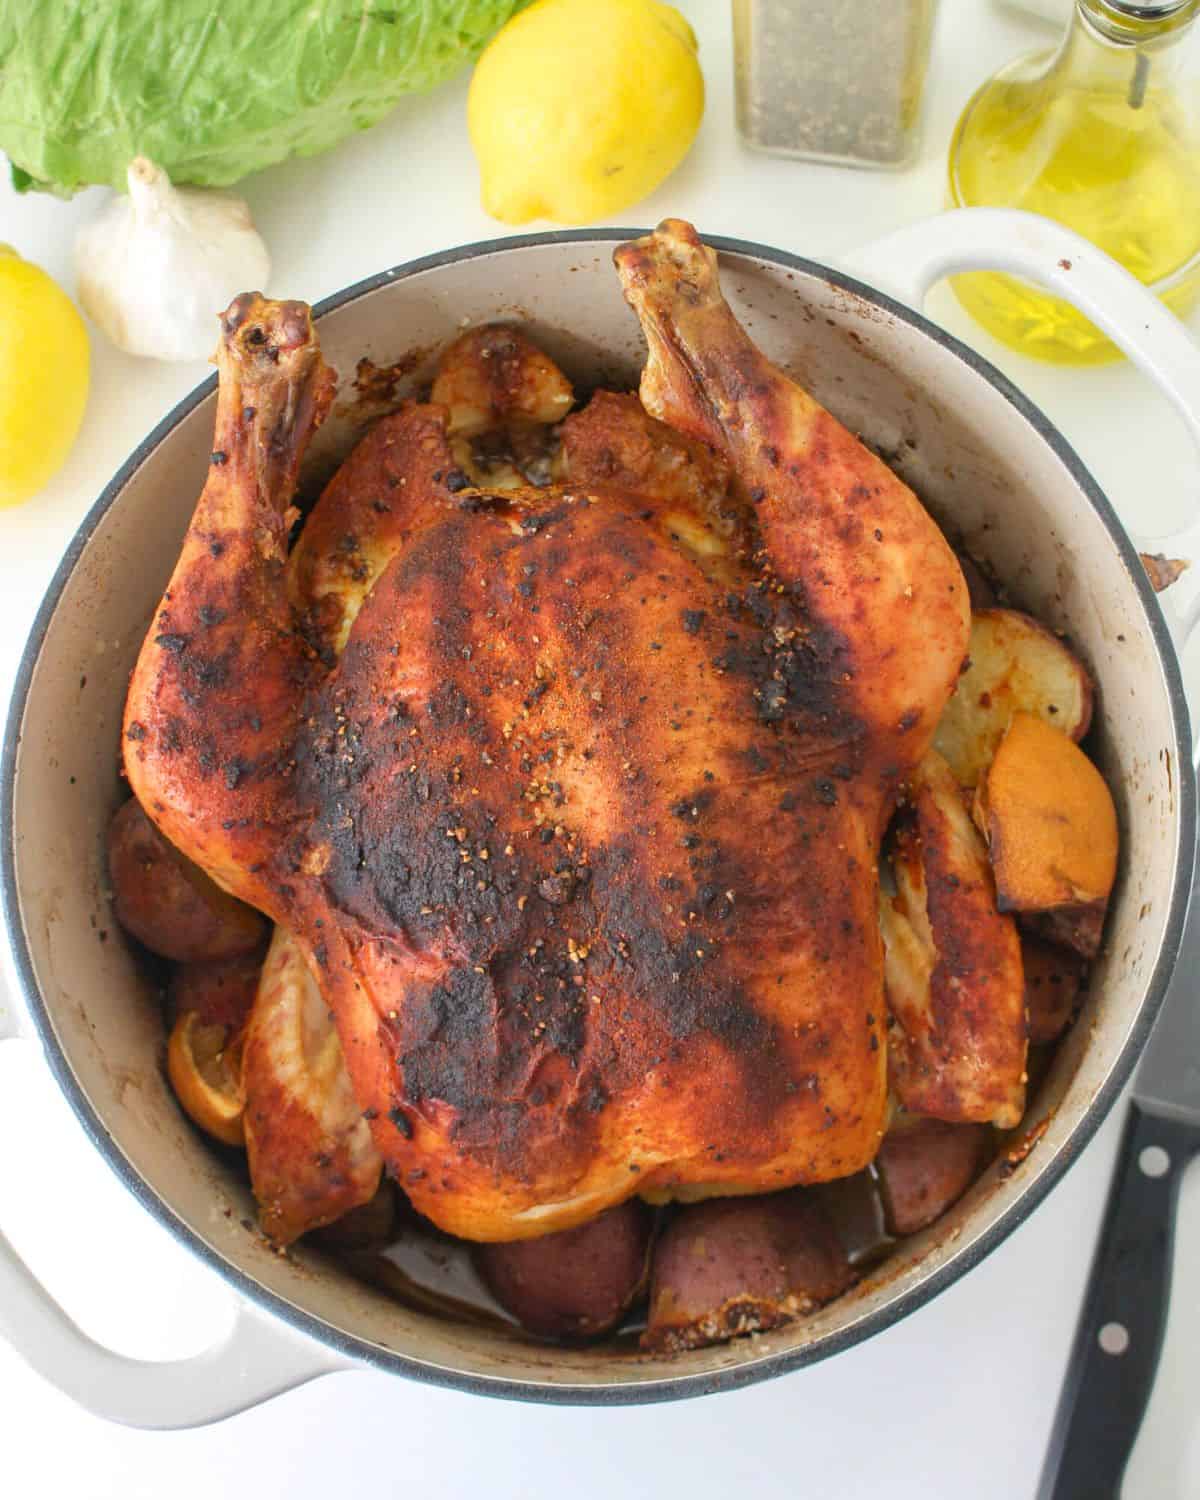 A dutch oven with potatoes and roasted chicken with lemon and spices.